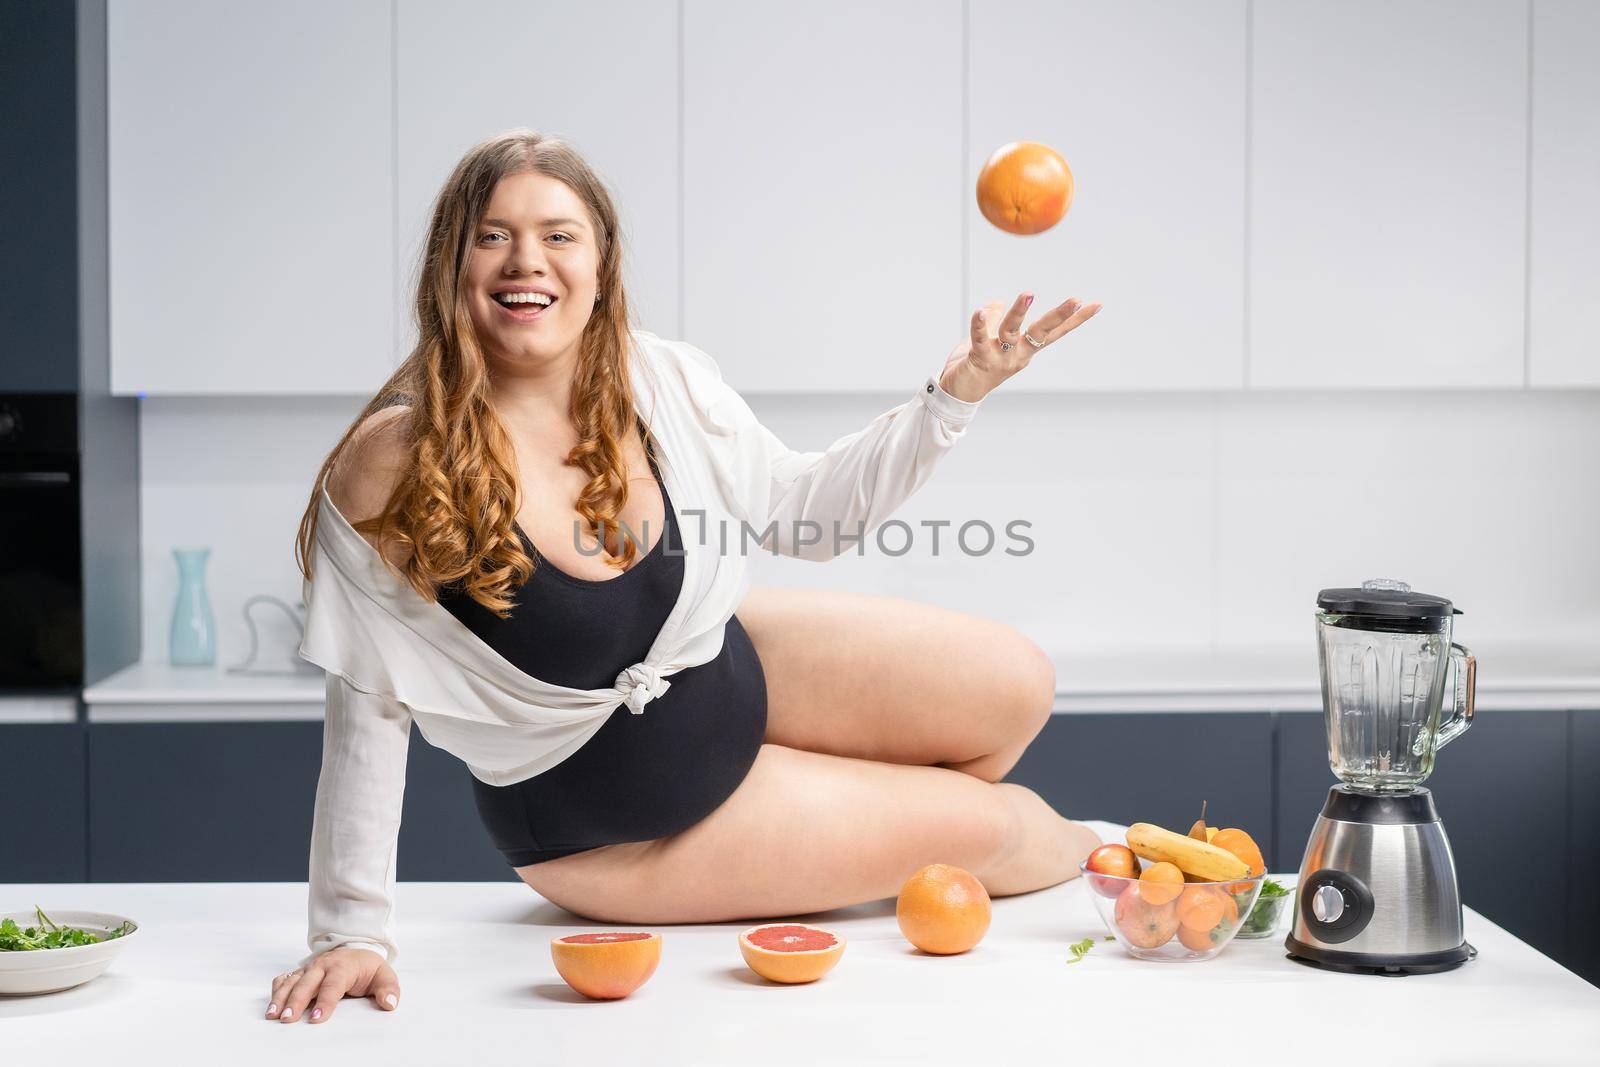 Girl with obese problem. Young sexy chubby white girl in black swimsuit, white shirt at modern kitchen table. juggling fruits in hand. Trying to loose weight fast. Fat barefoot girl low carb diet.